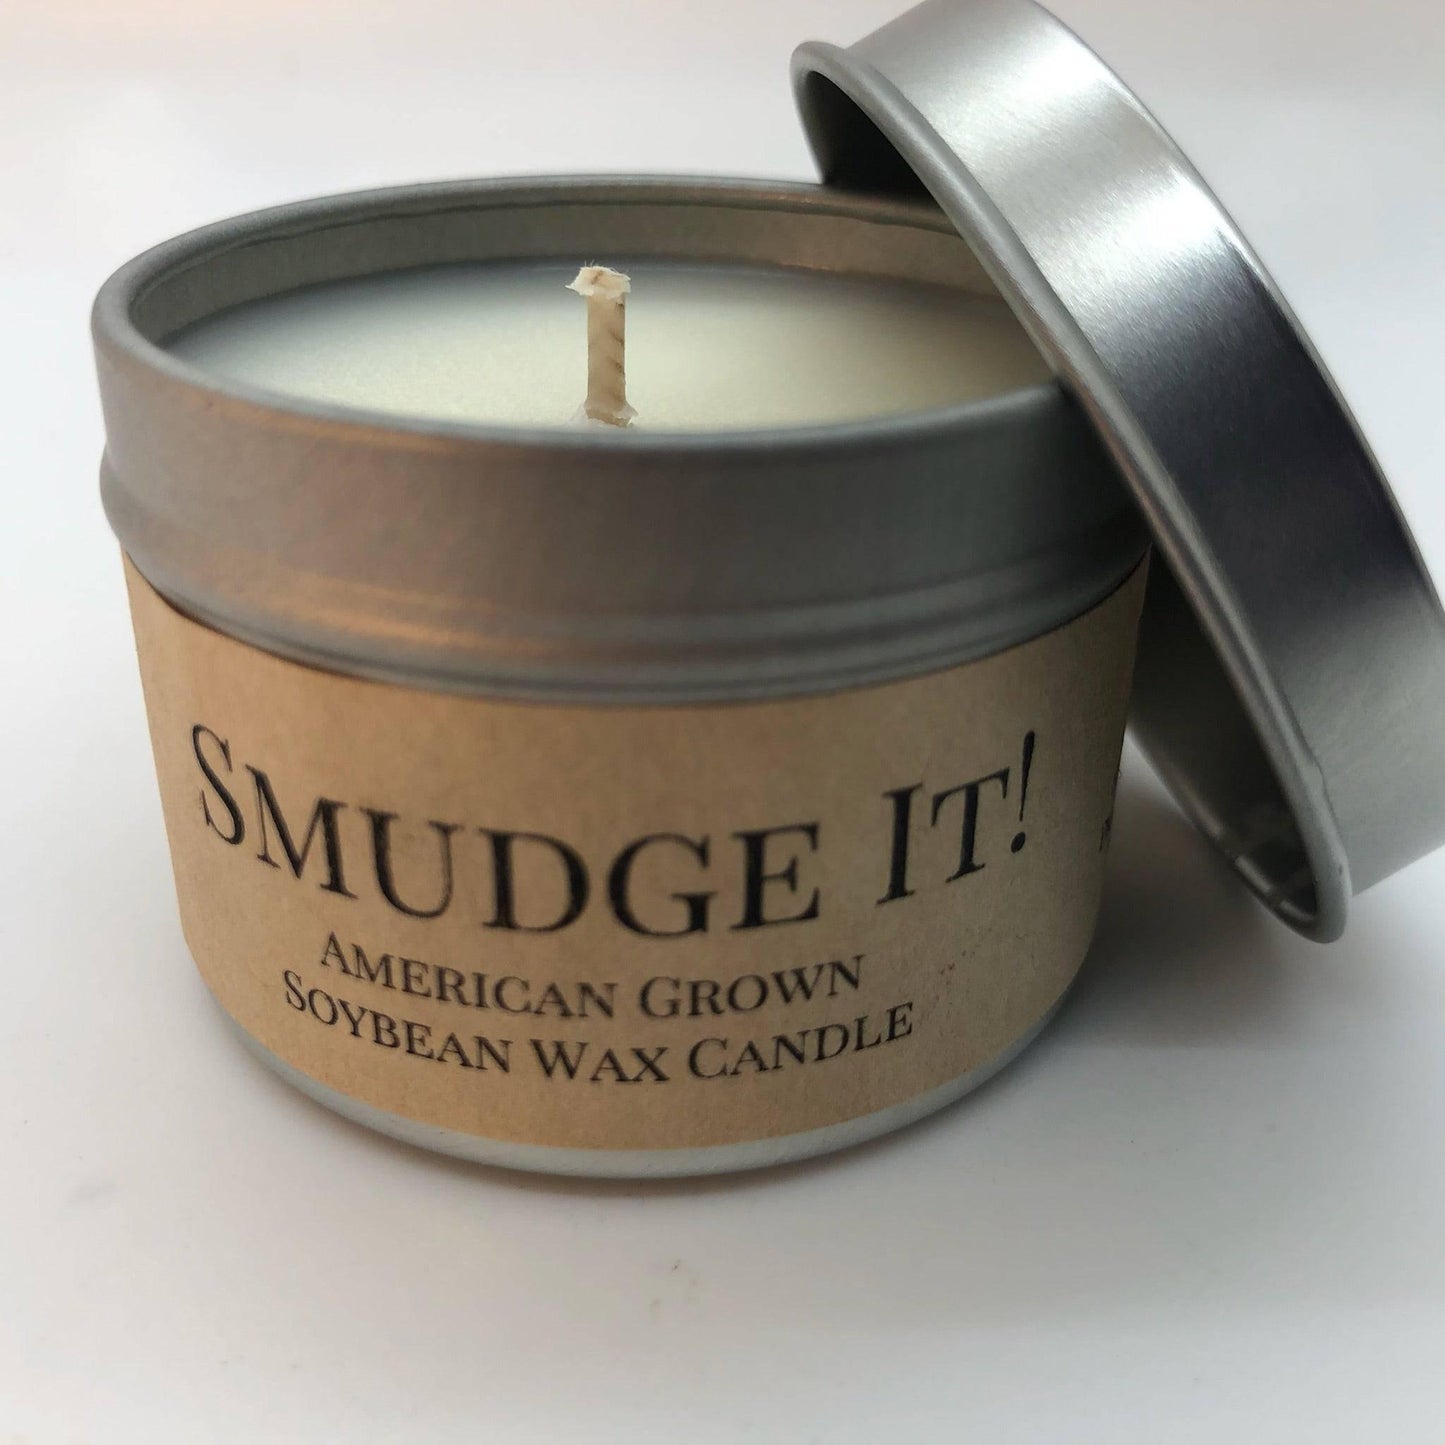 Smudge It! Soy Wax Candle | 2 oz Travel Tin - Prairie Fire Candles